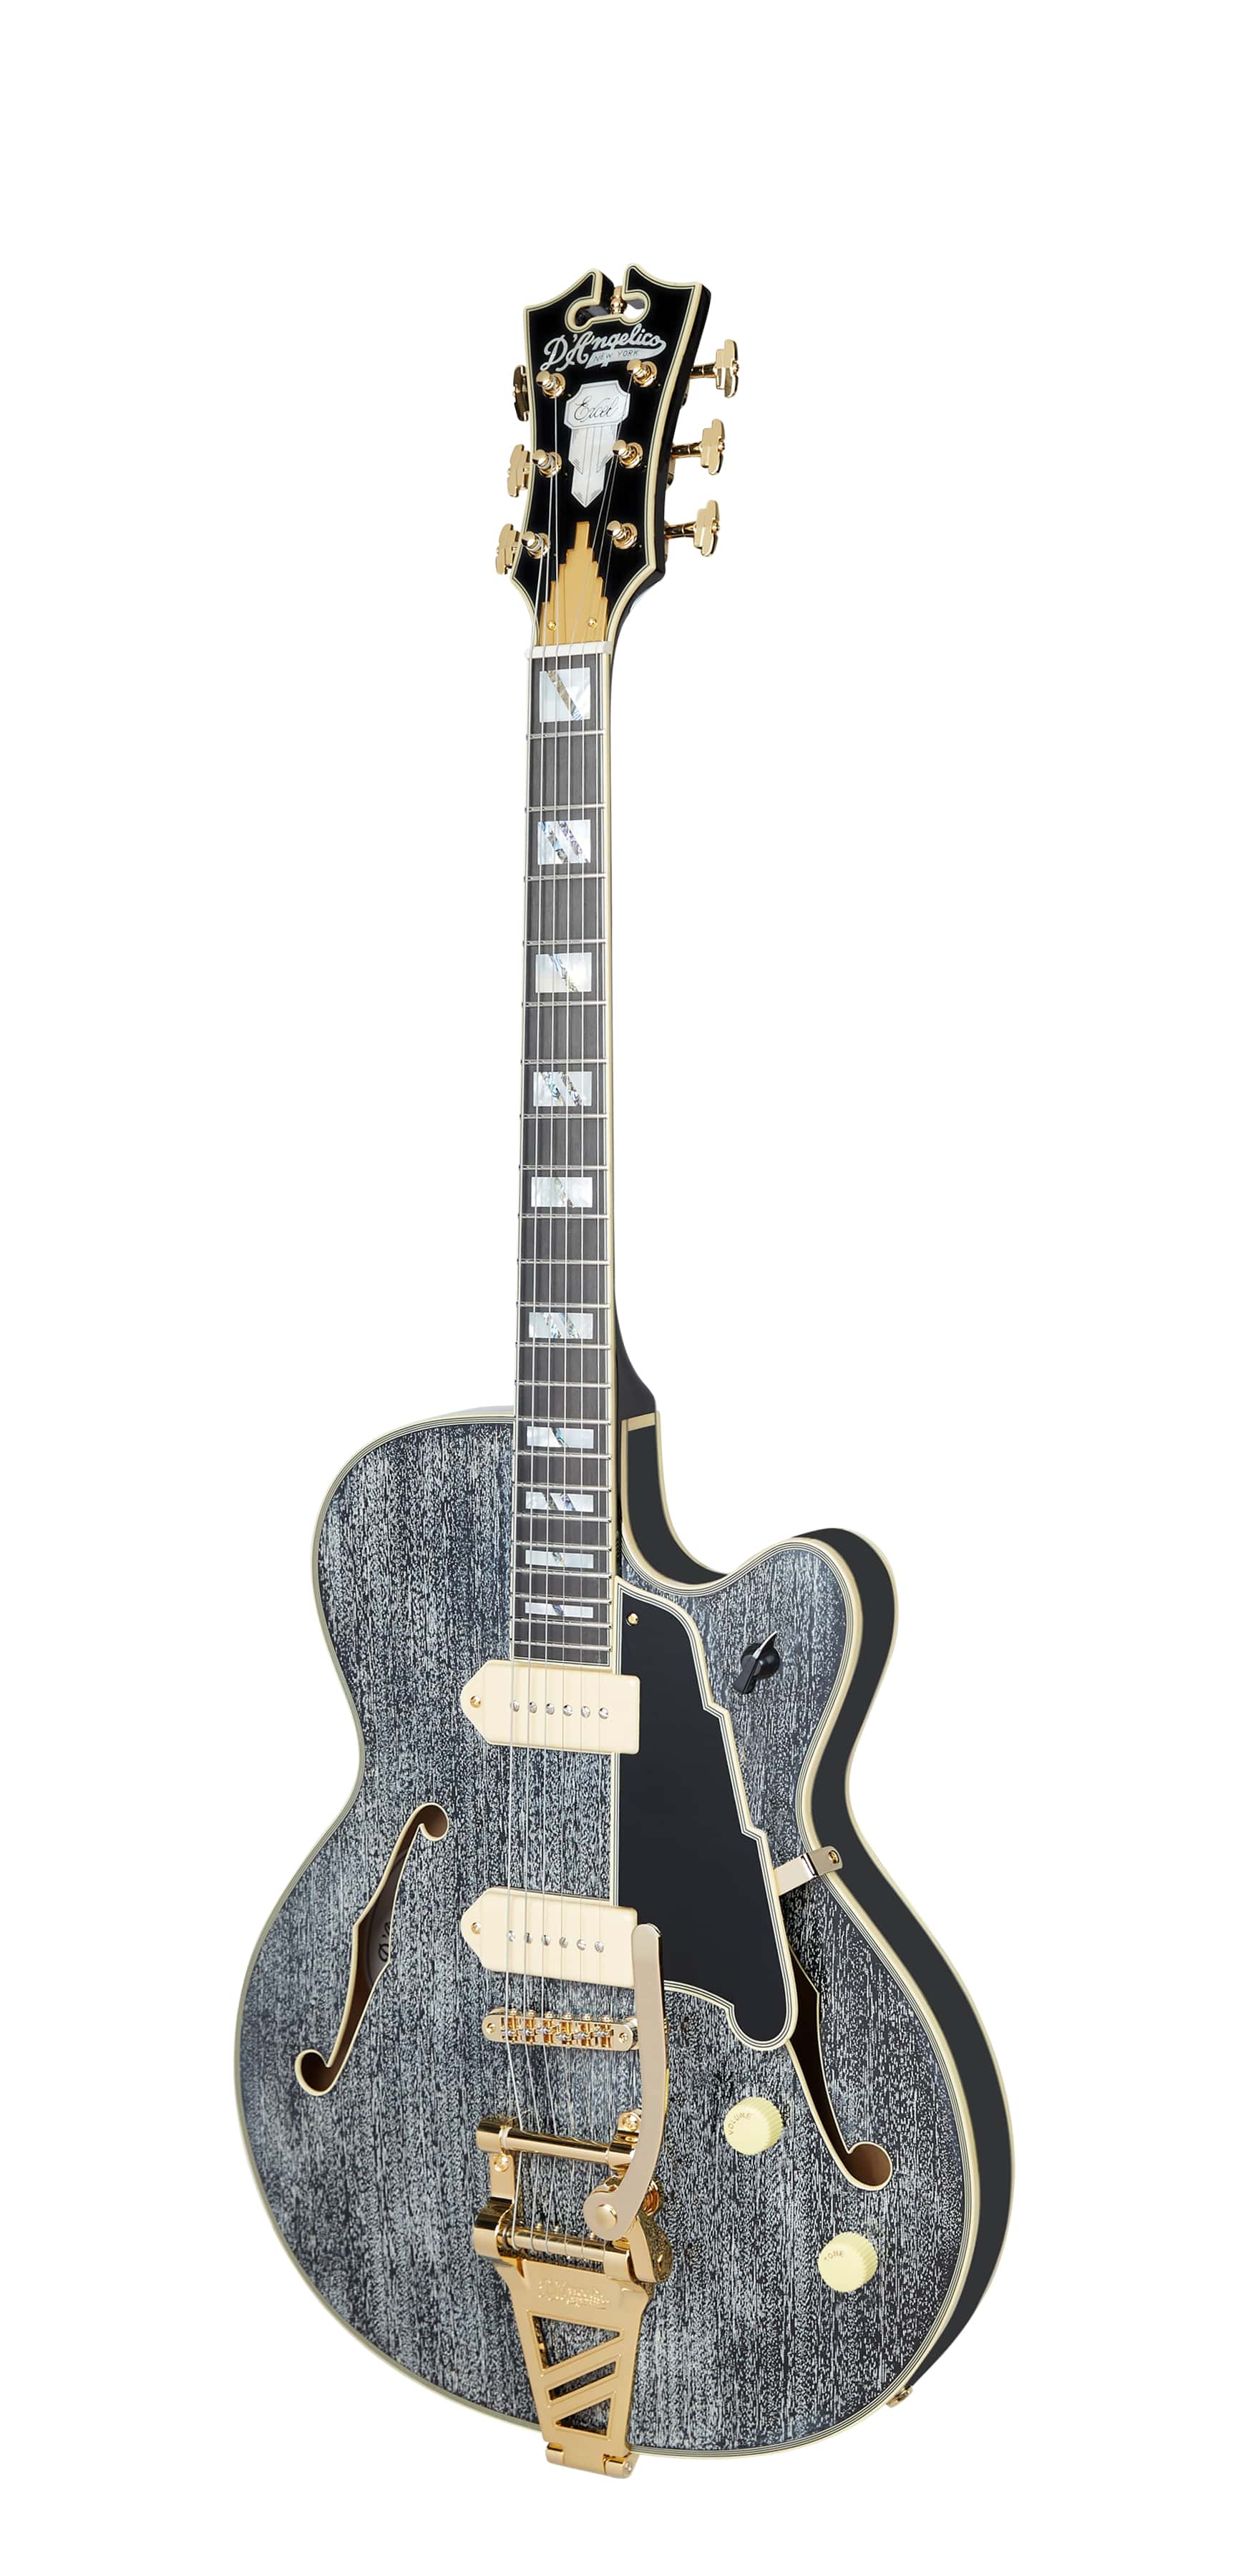 D'Angelico Excel 59 Hollowbody Electric Guitar With Shield Tremolo Black Dog DAE59BDGTR